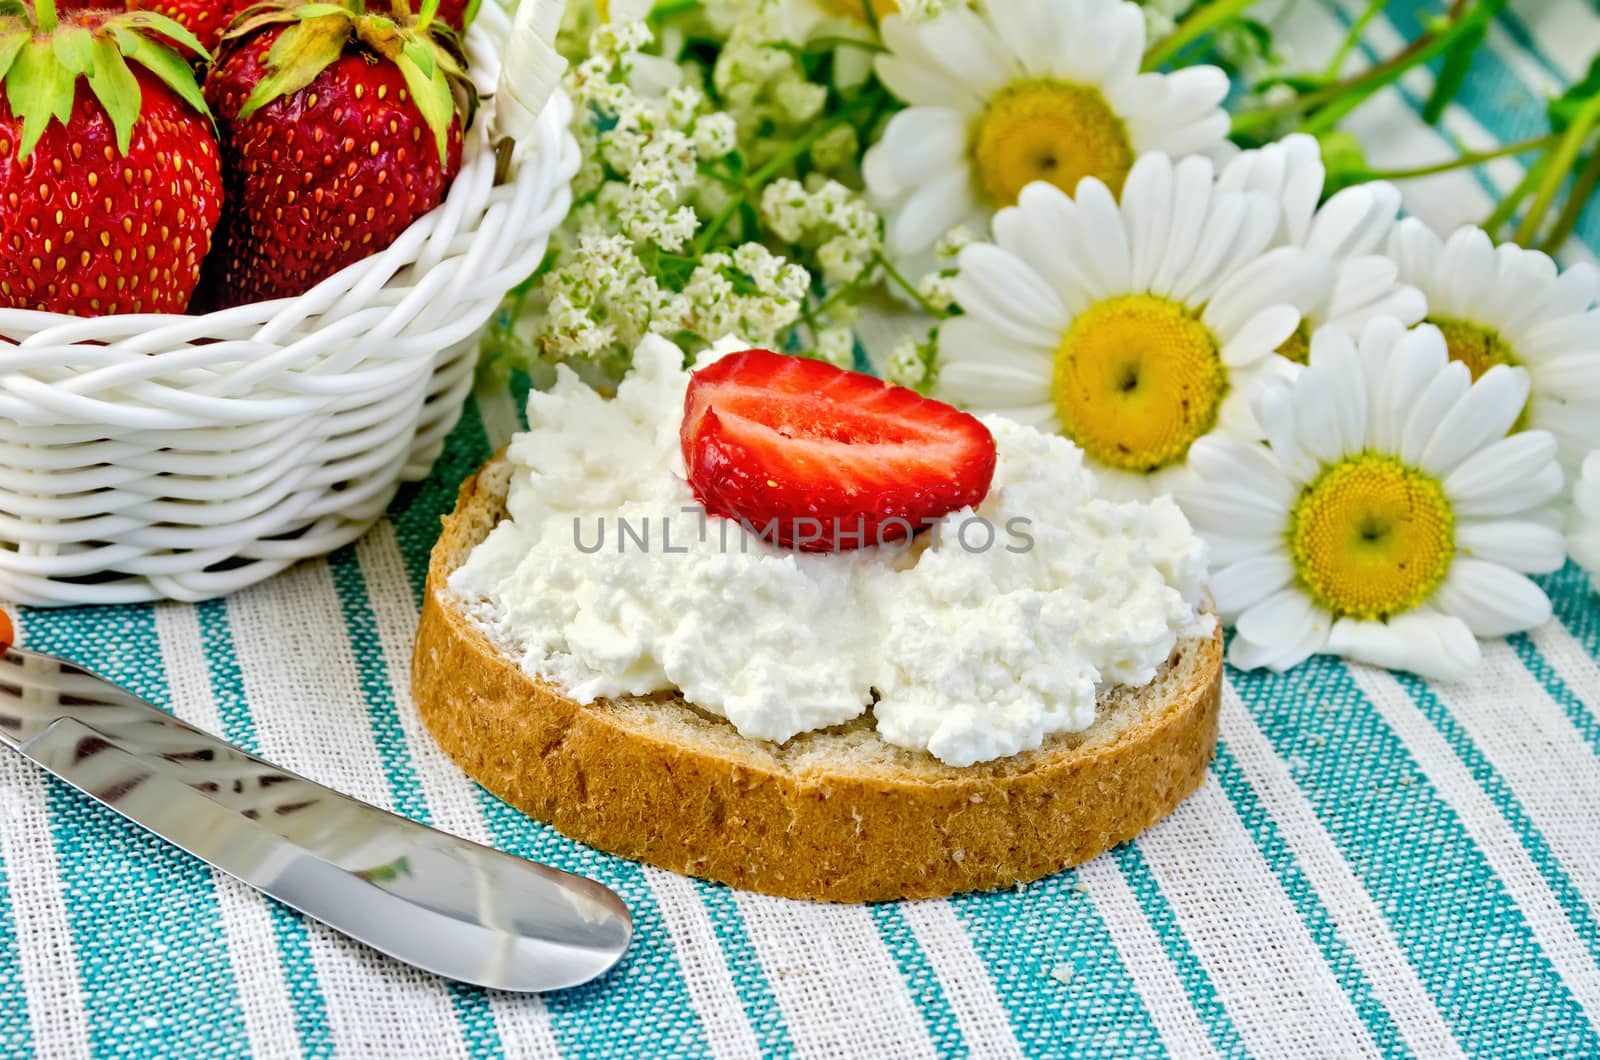 Hunk of bread with cottage cheese cream and strawberries, a basket with berries, a knife, a bouquet of daisies on a green striped cloth